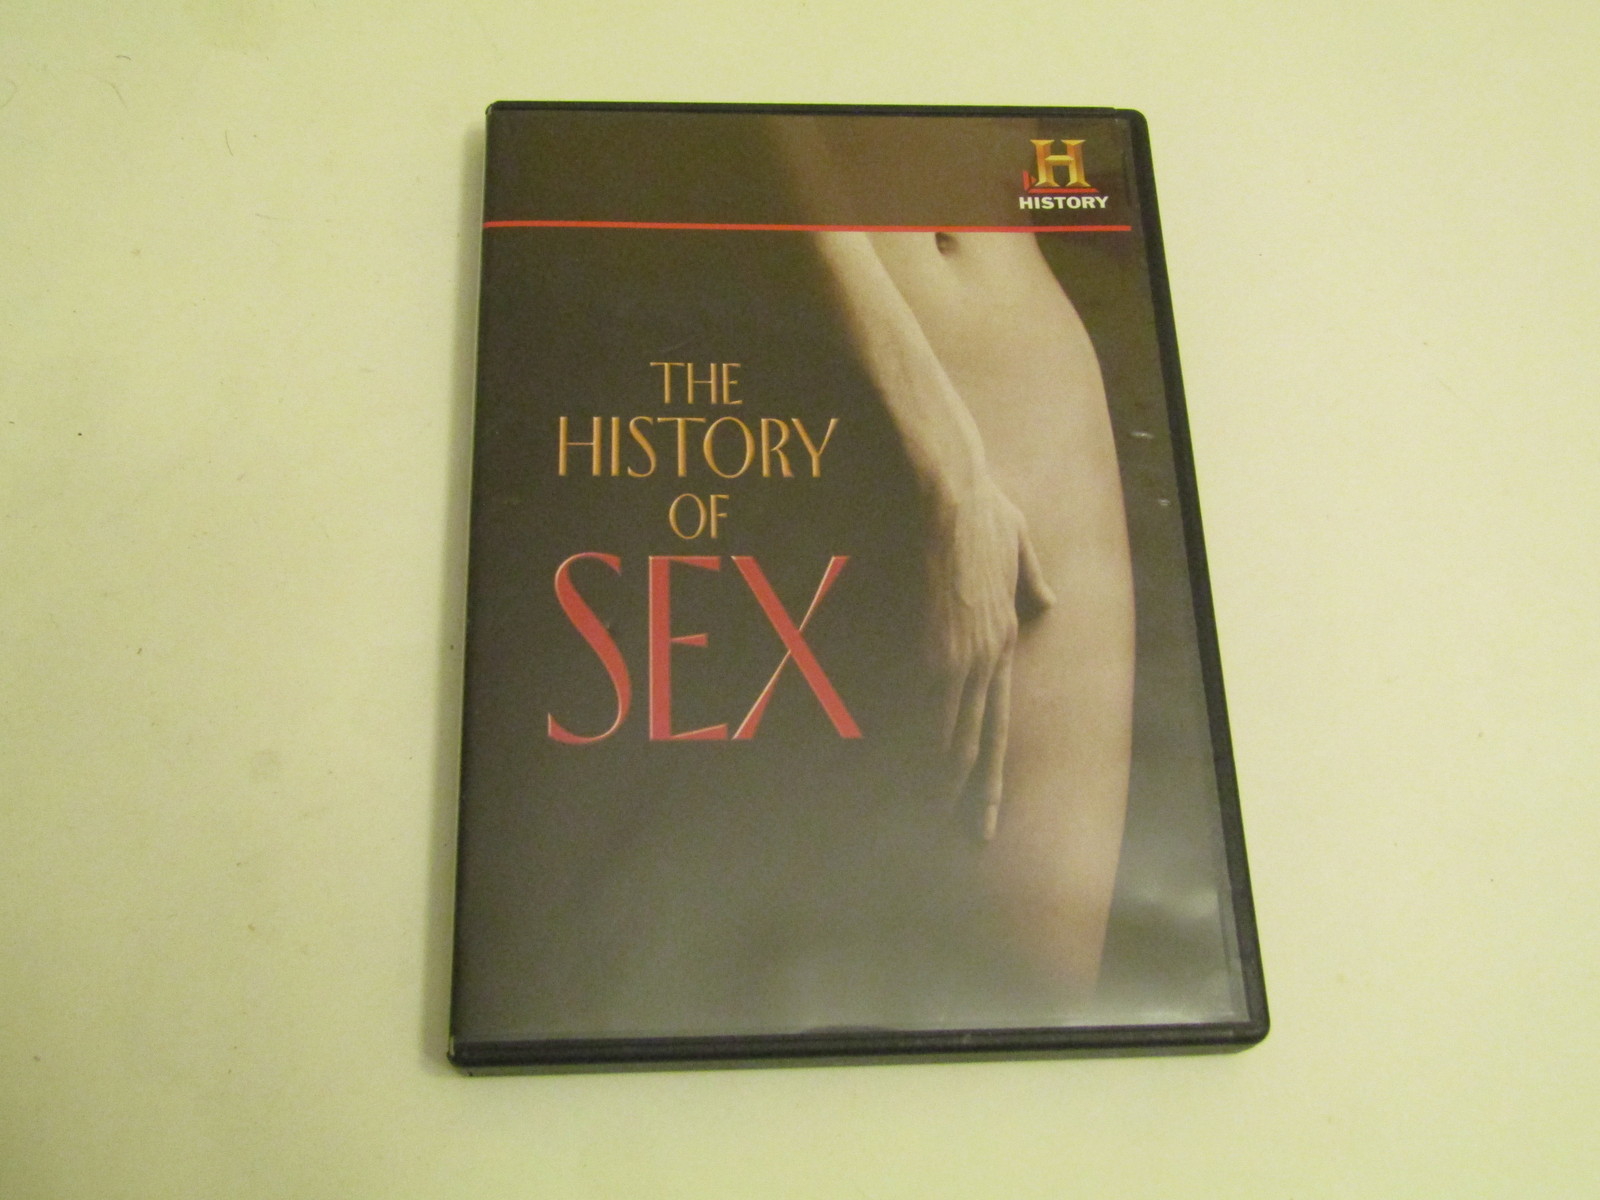 Primary image for The History Channel: The History Of Sex DVD (Used)